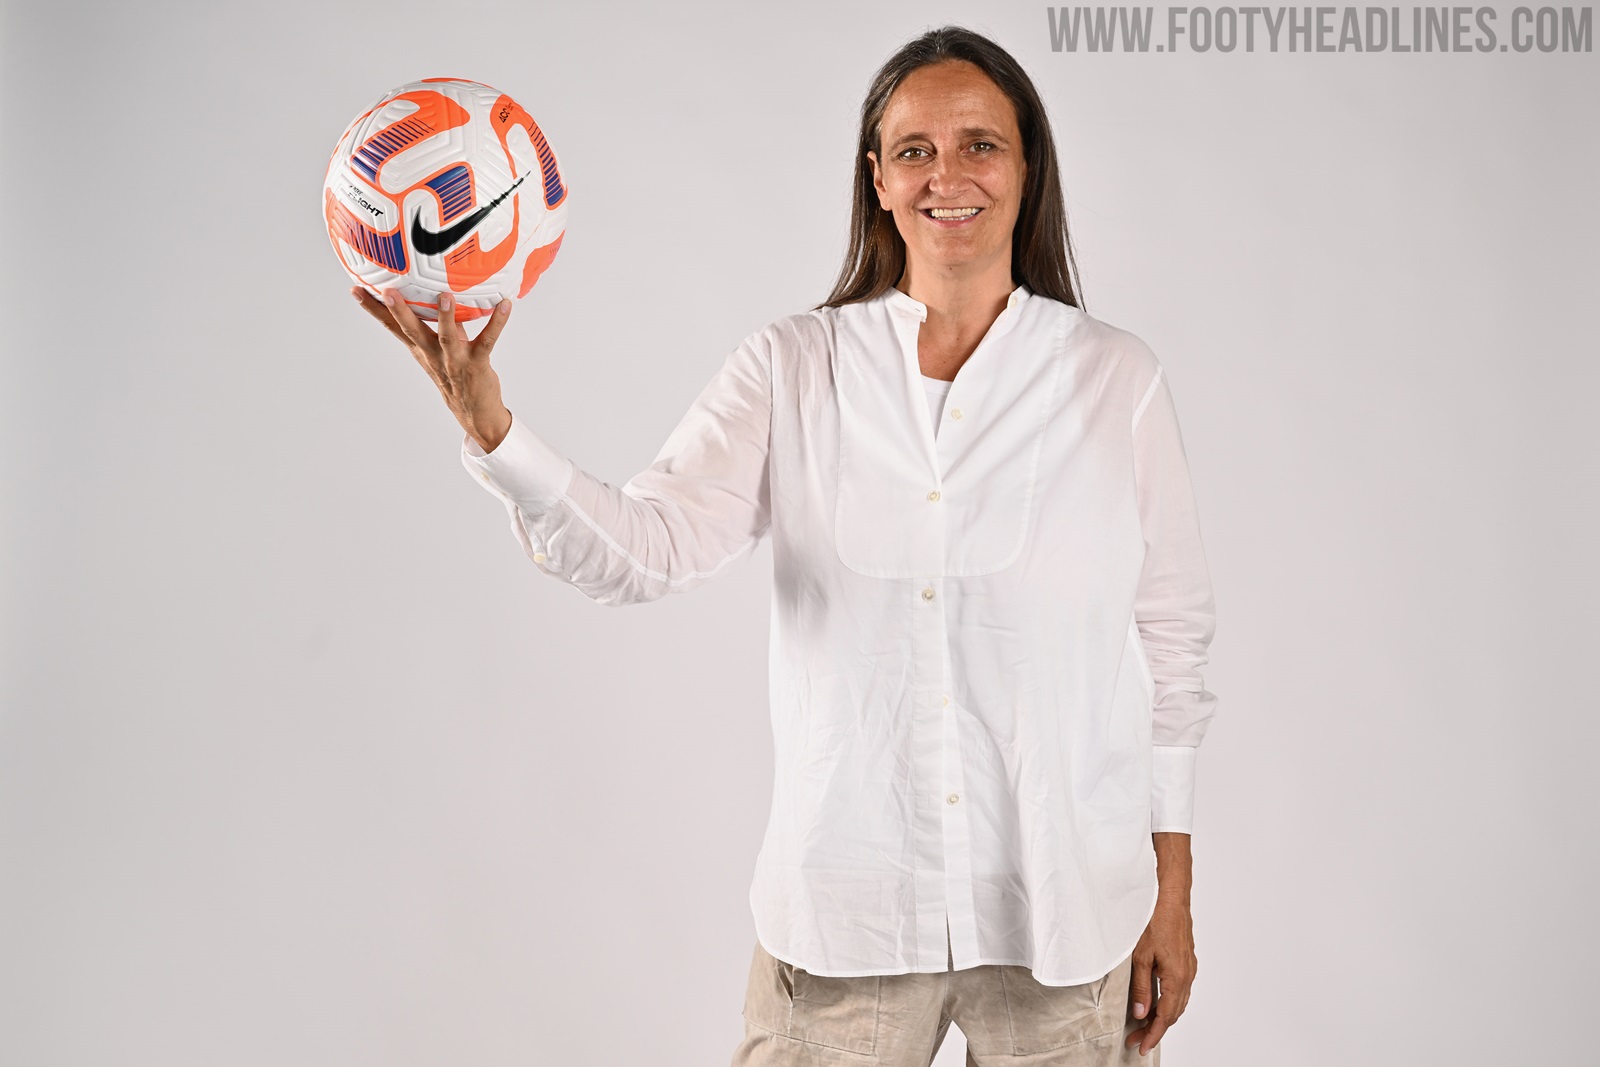 The Official Nike Serie A Femminile match ball during the Women's News  Photo - Getty Images